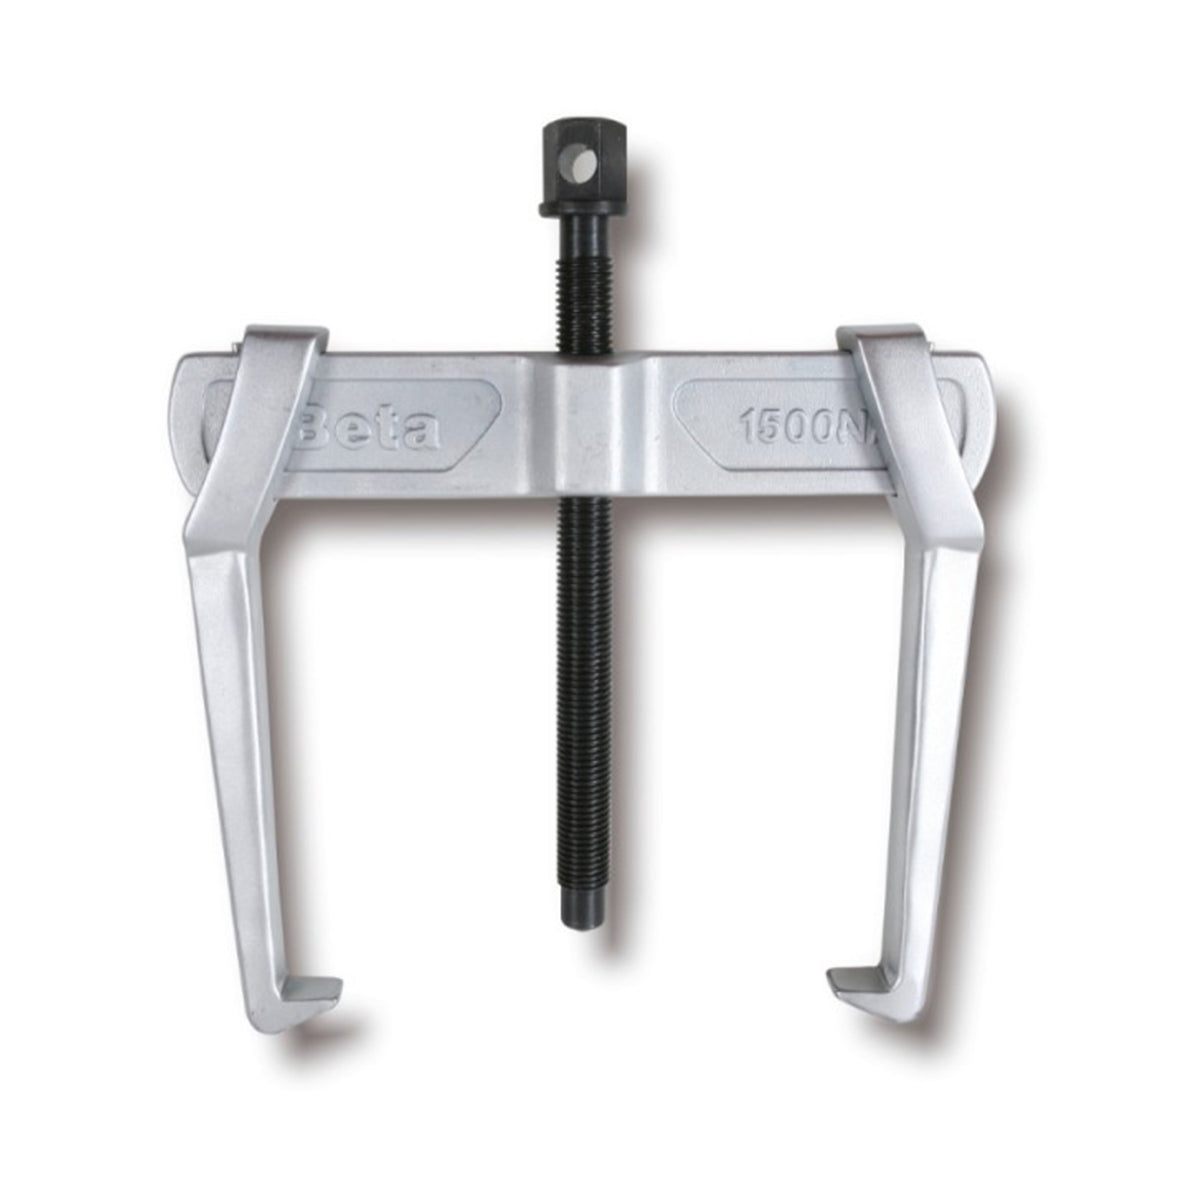 A min÷Max 23÷100mm Universal puller with 2 sliding legs  - Beta 1500N/2